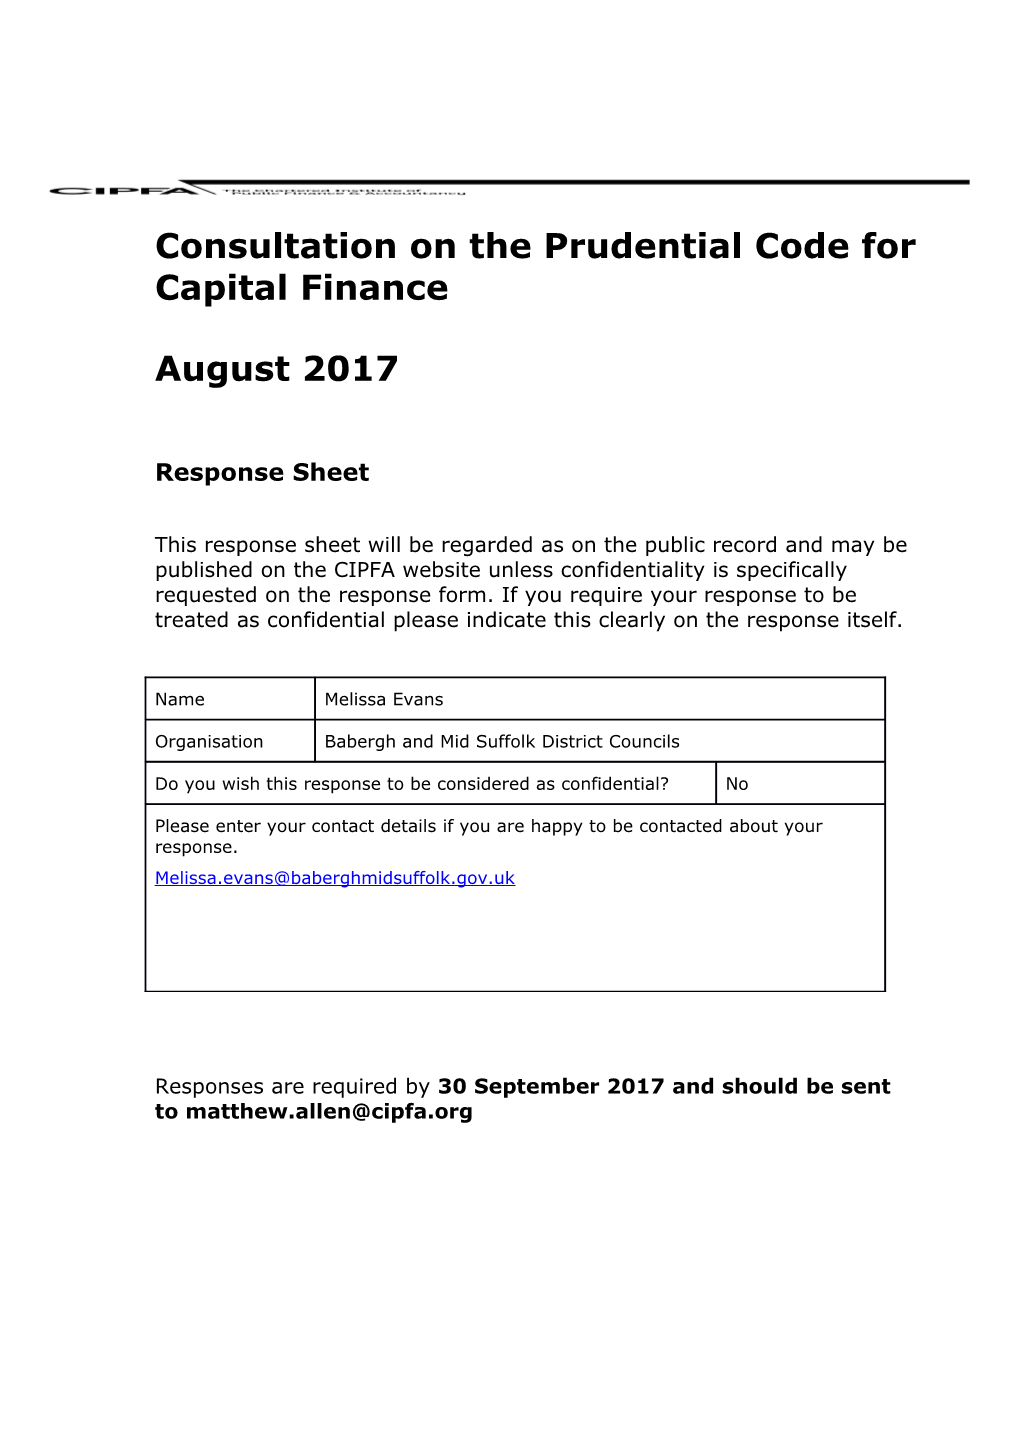 Consultation on the Prudential Code for Capital Finance